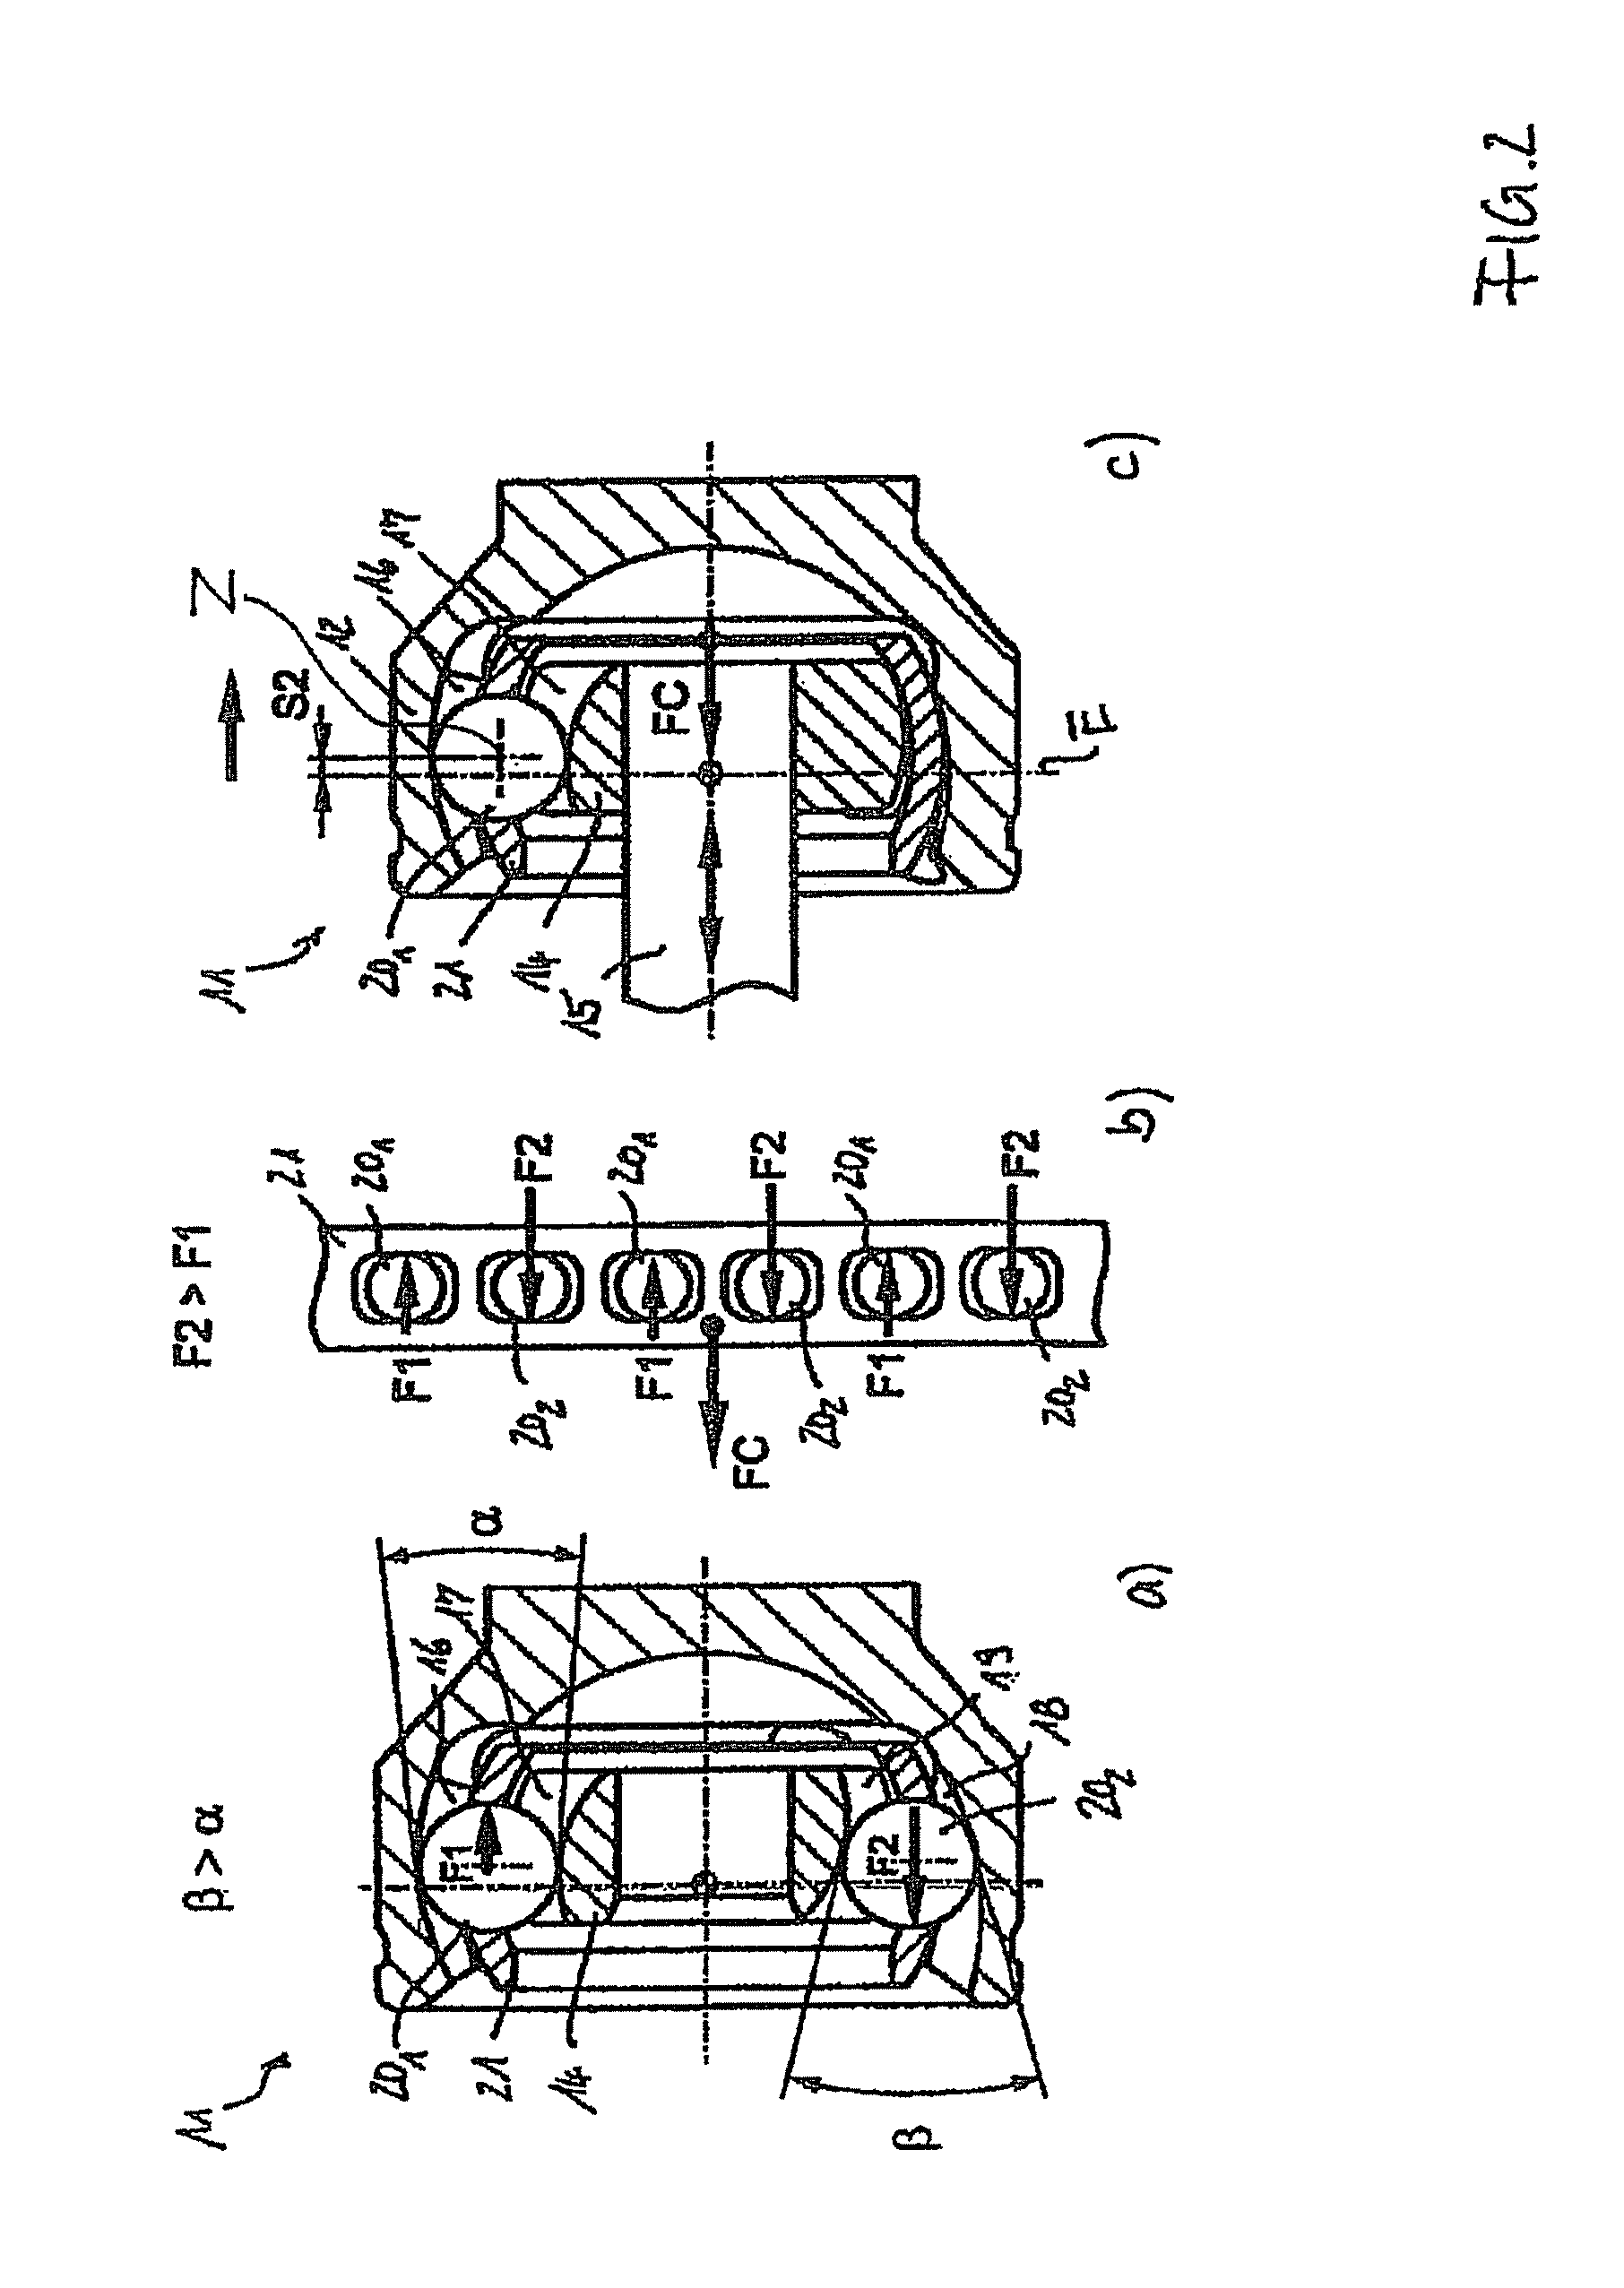 Driveshaft comprising a counter track joint featuring a delimited axial displacement path